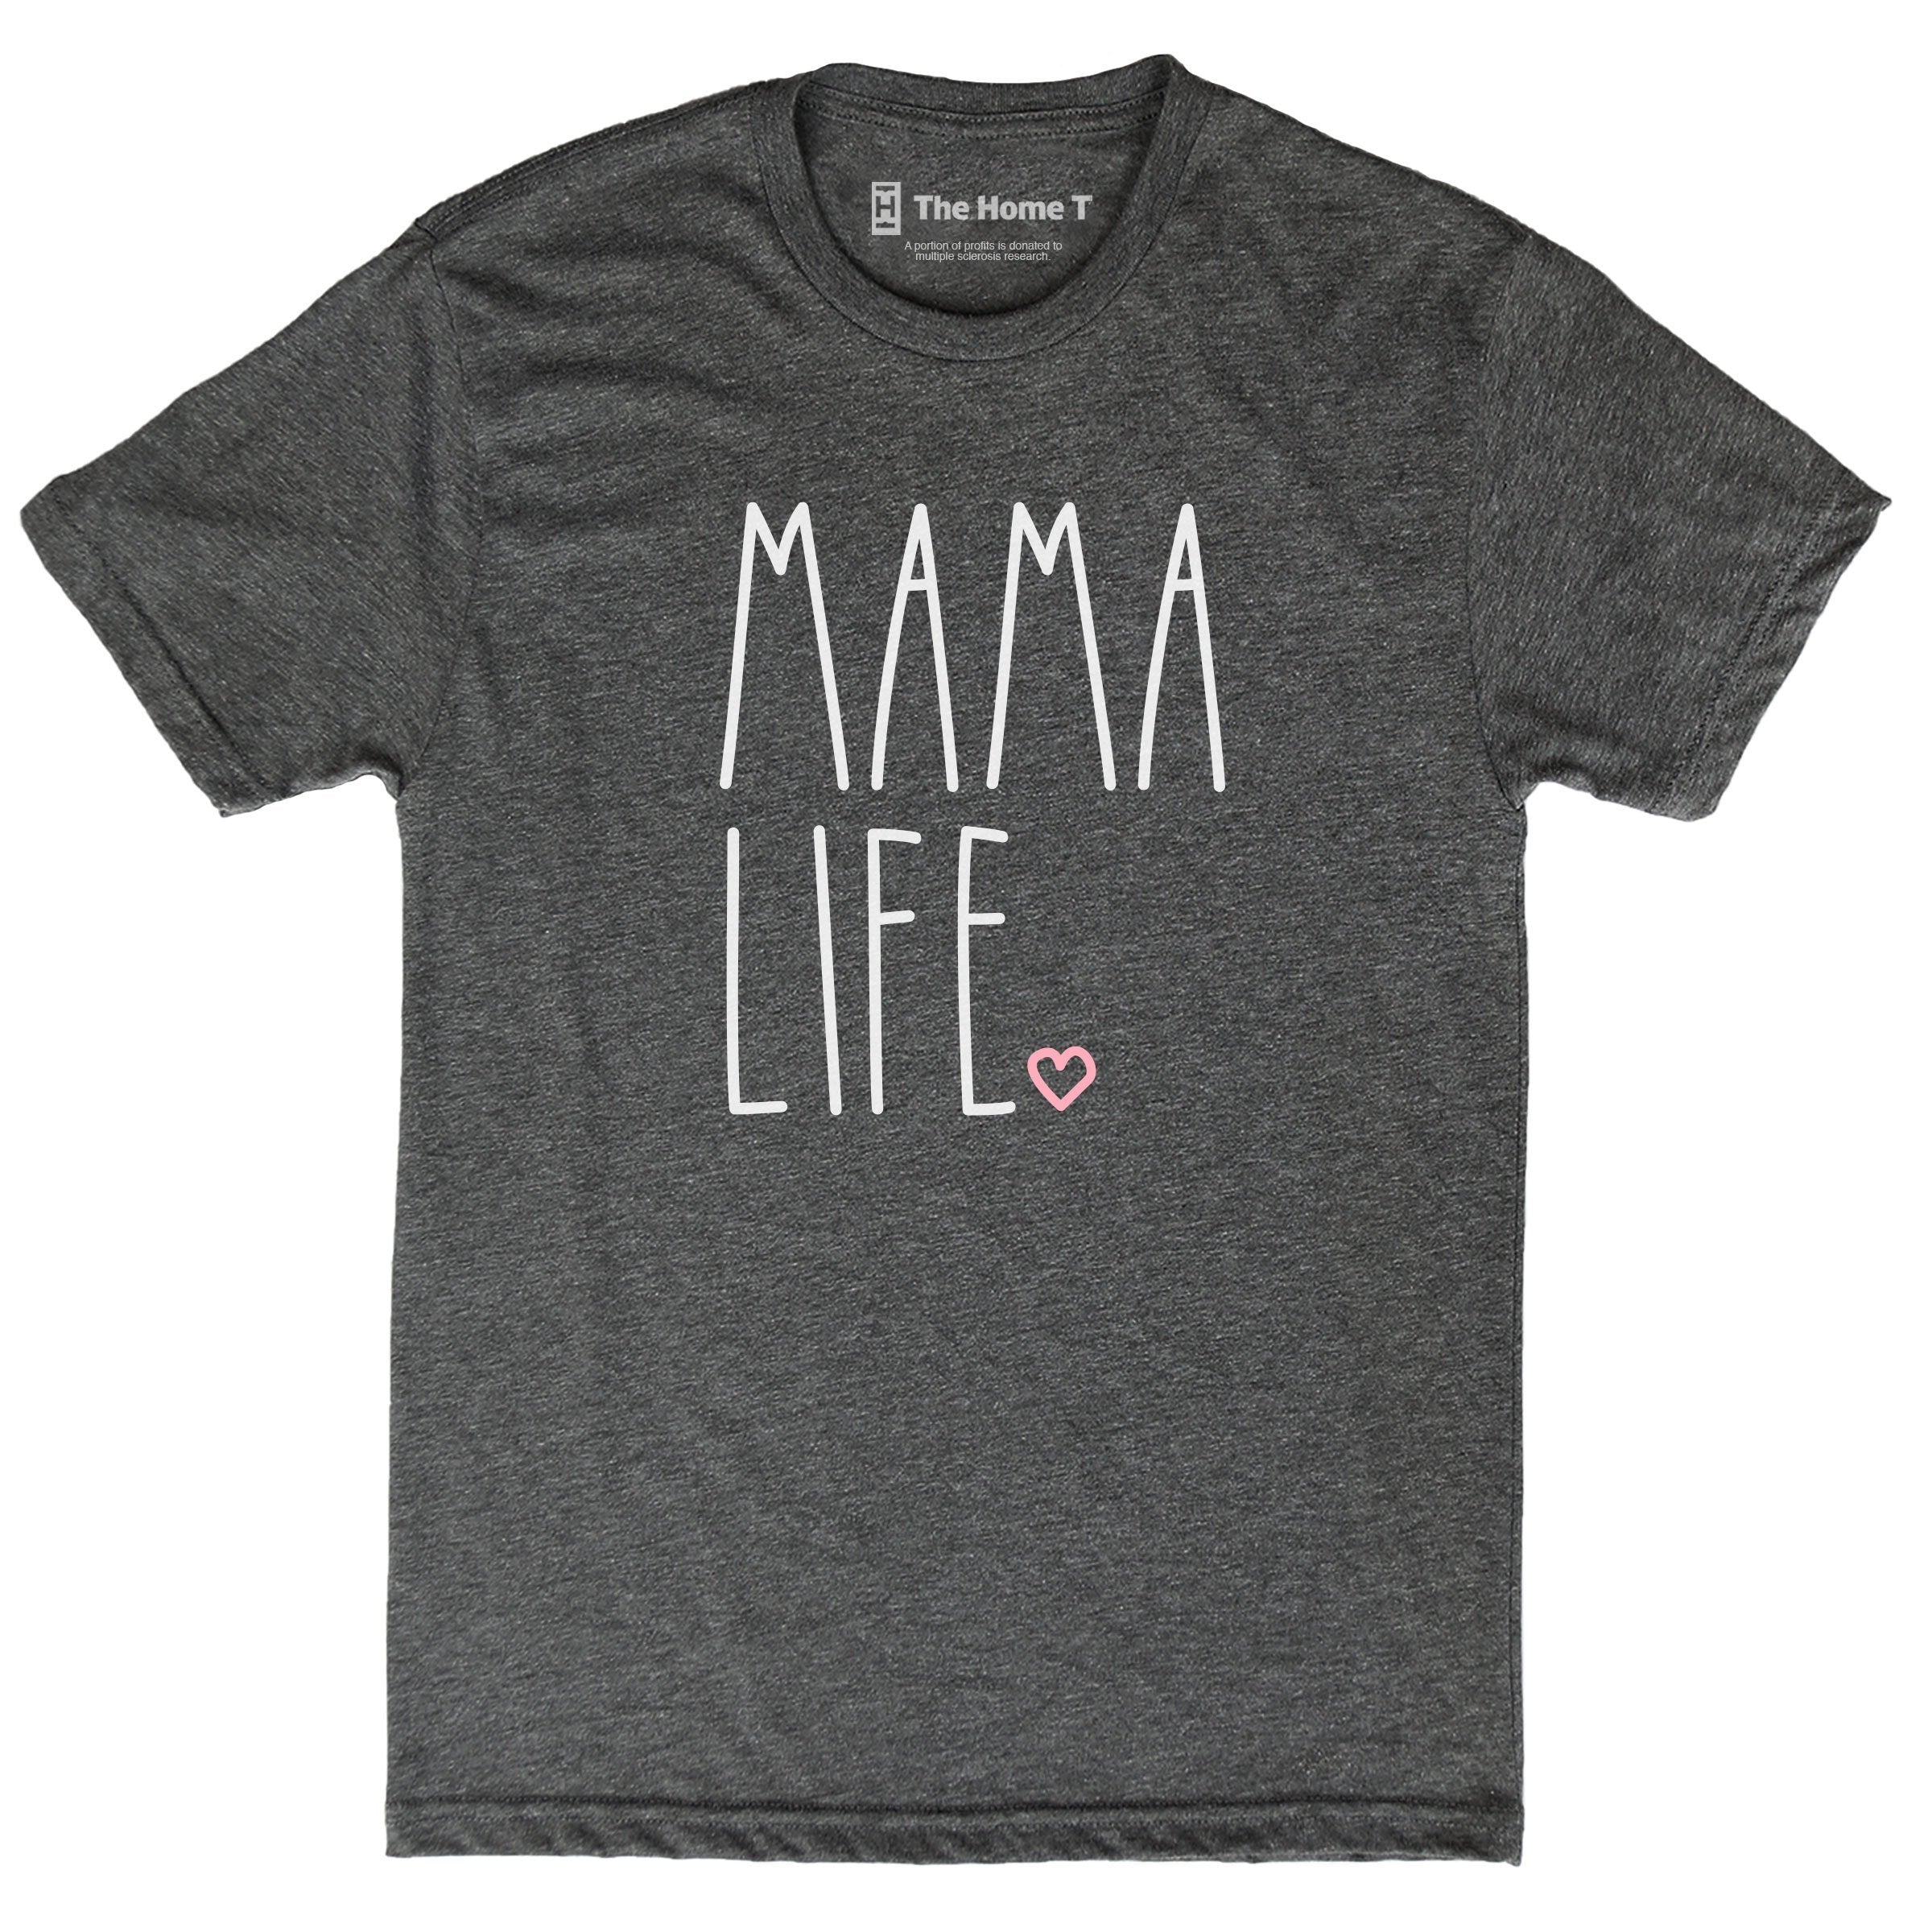 Mama Life Crew neck The Home T